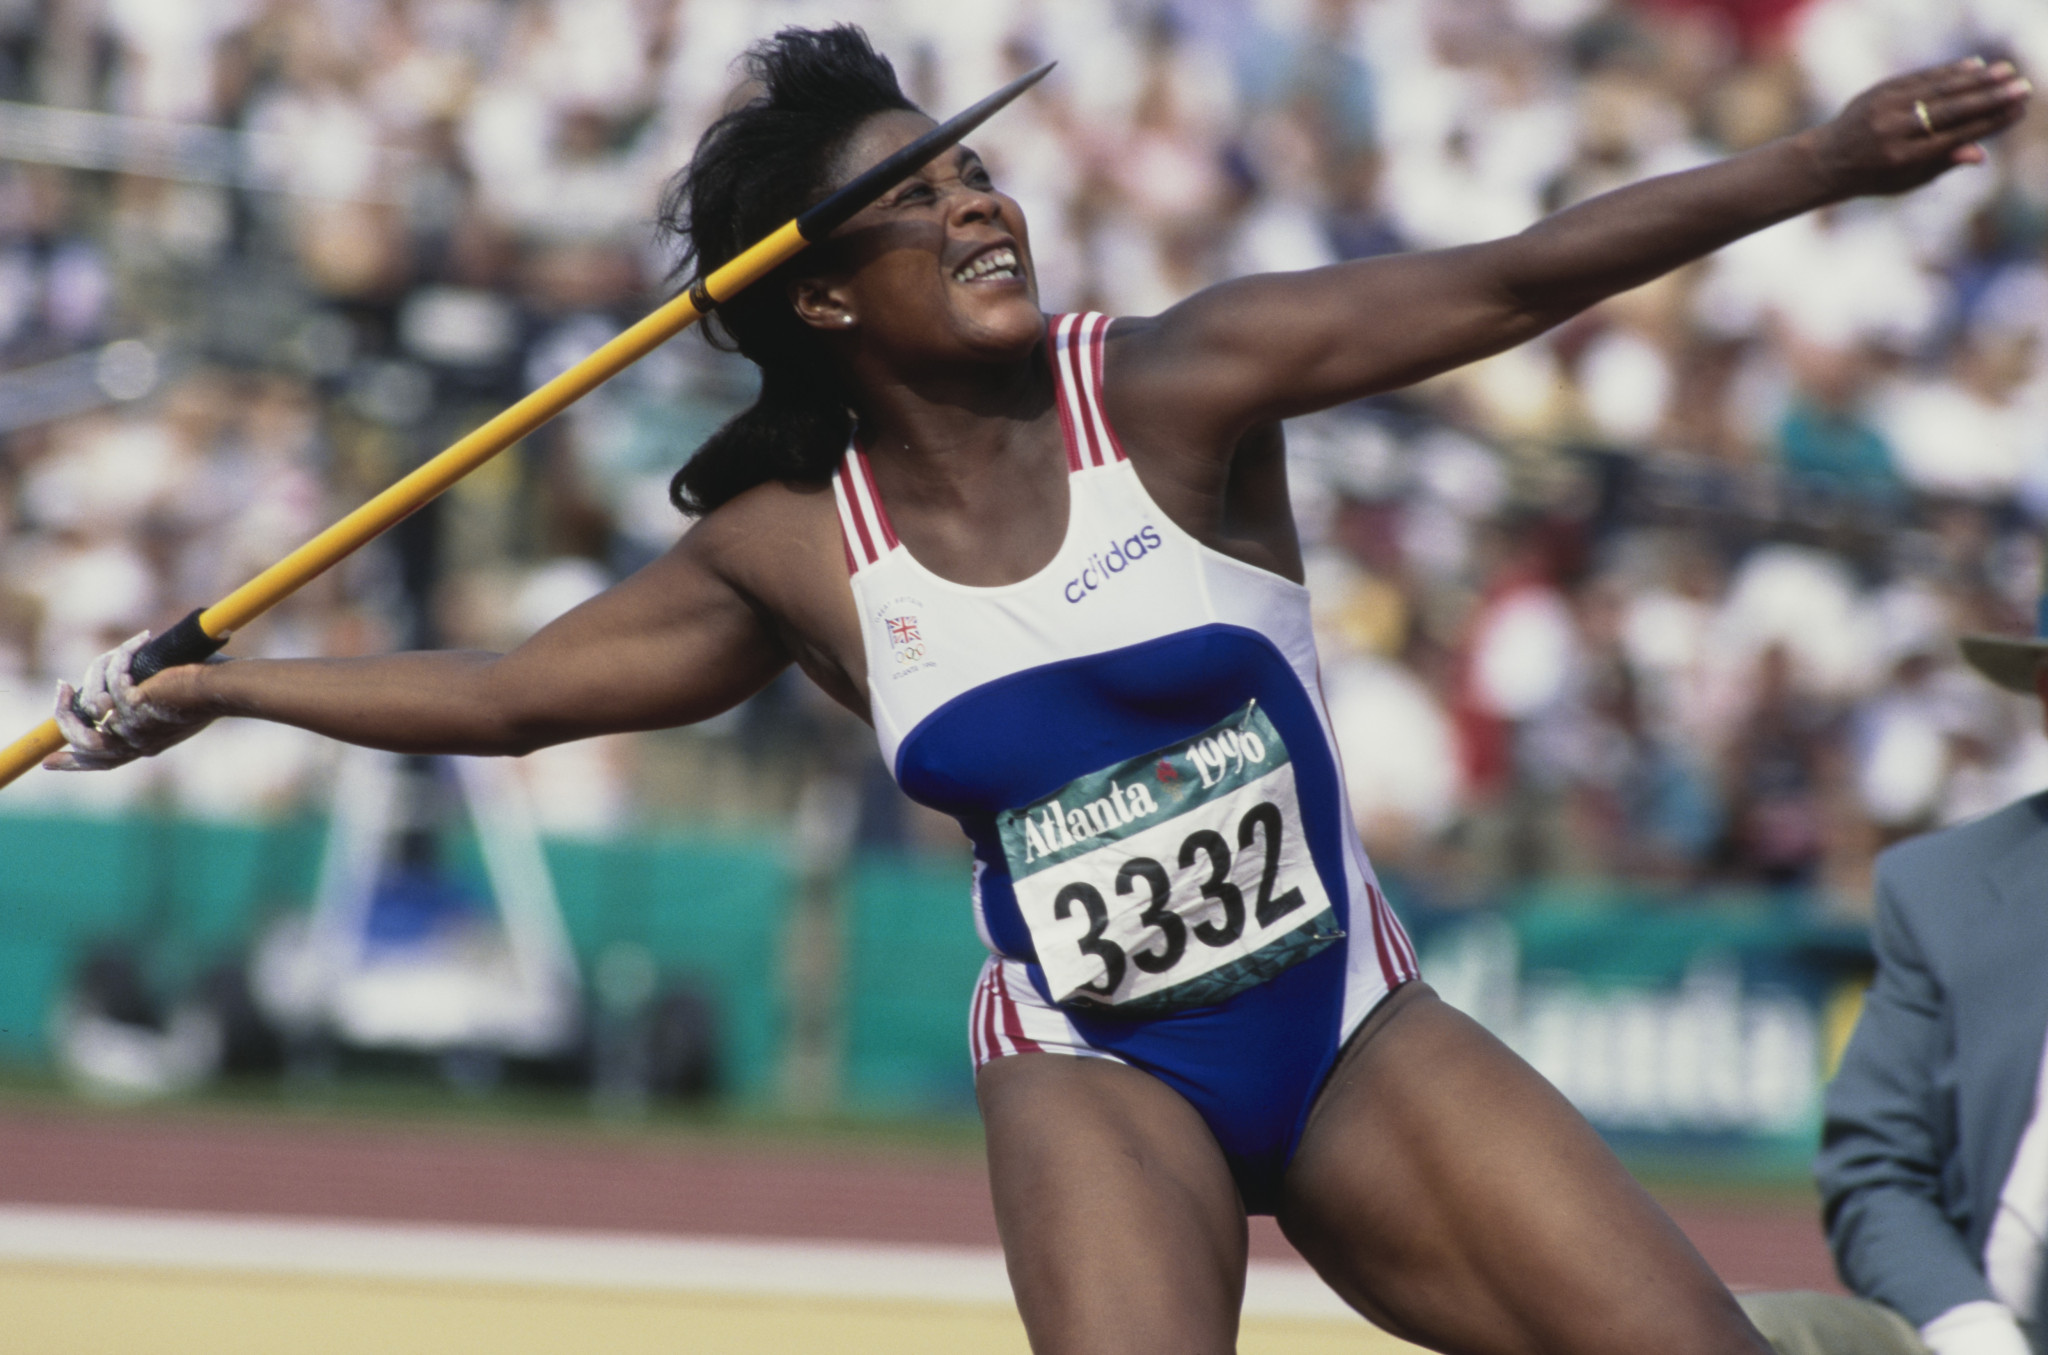 Wolverhampton Athletics Club member Tessa Sanderson is an Olympic gold medallist in the javelin ©Getty Images